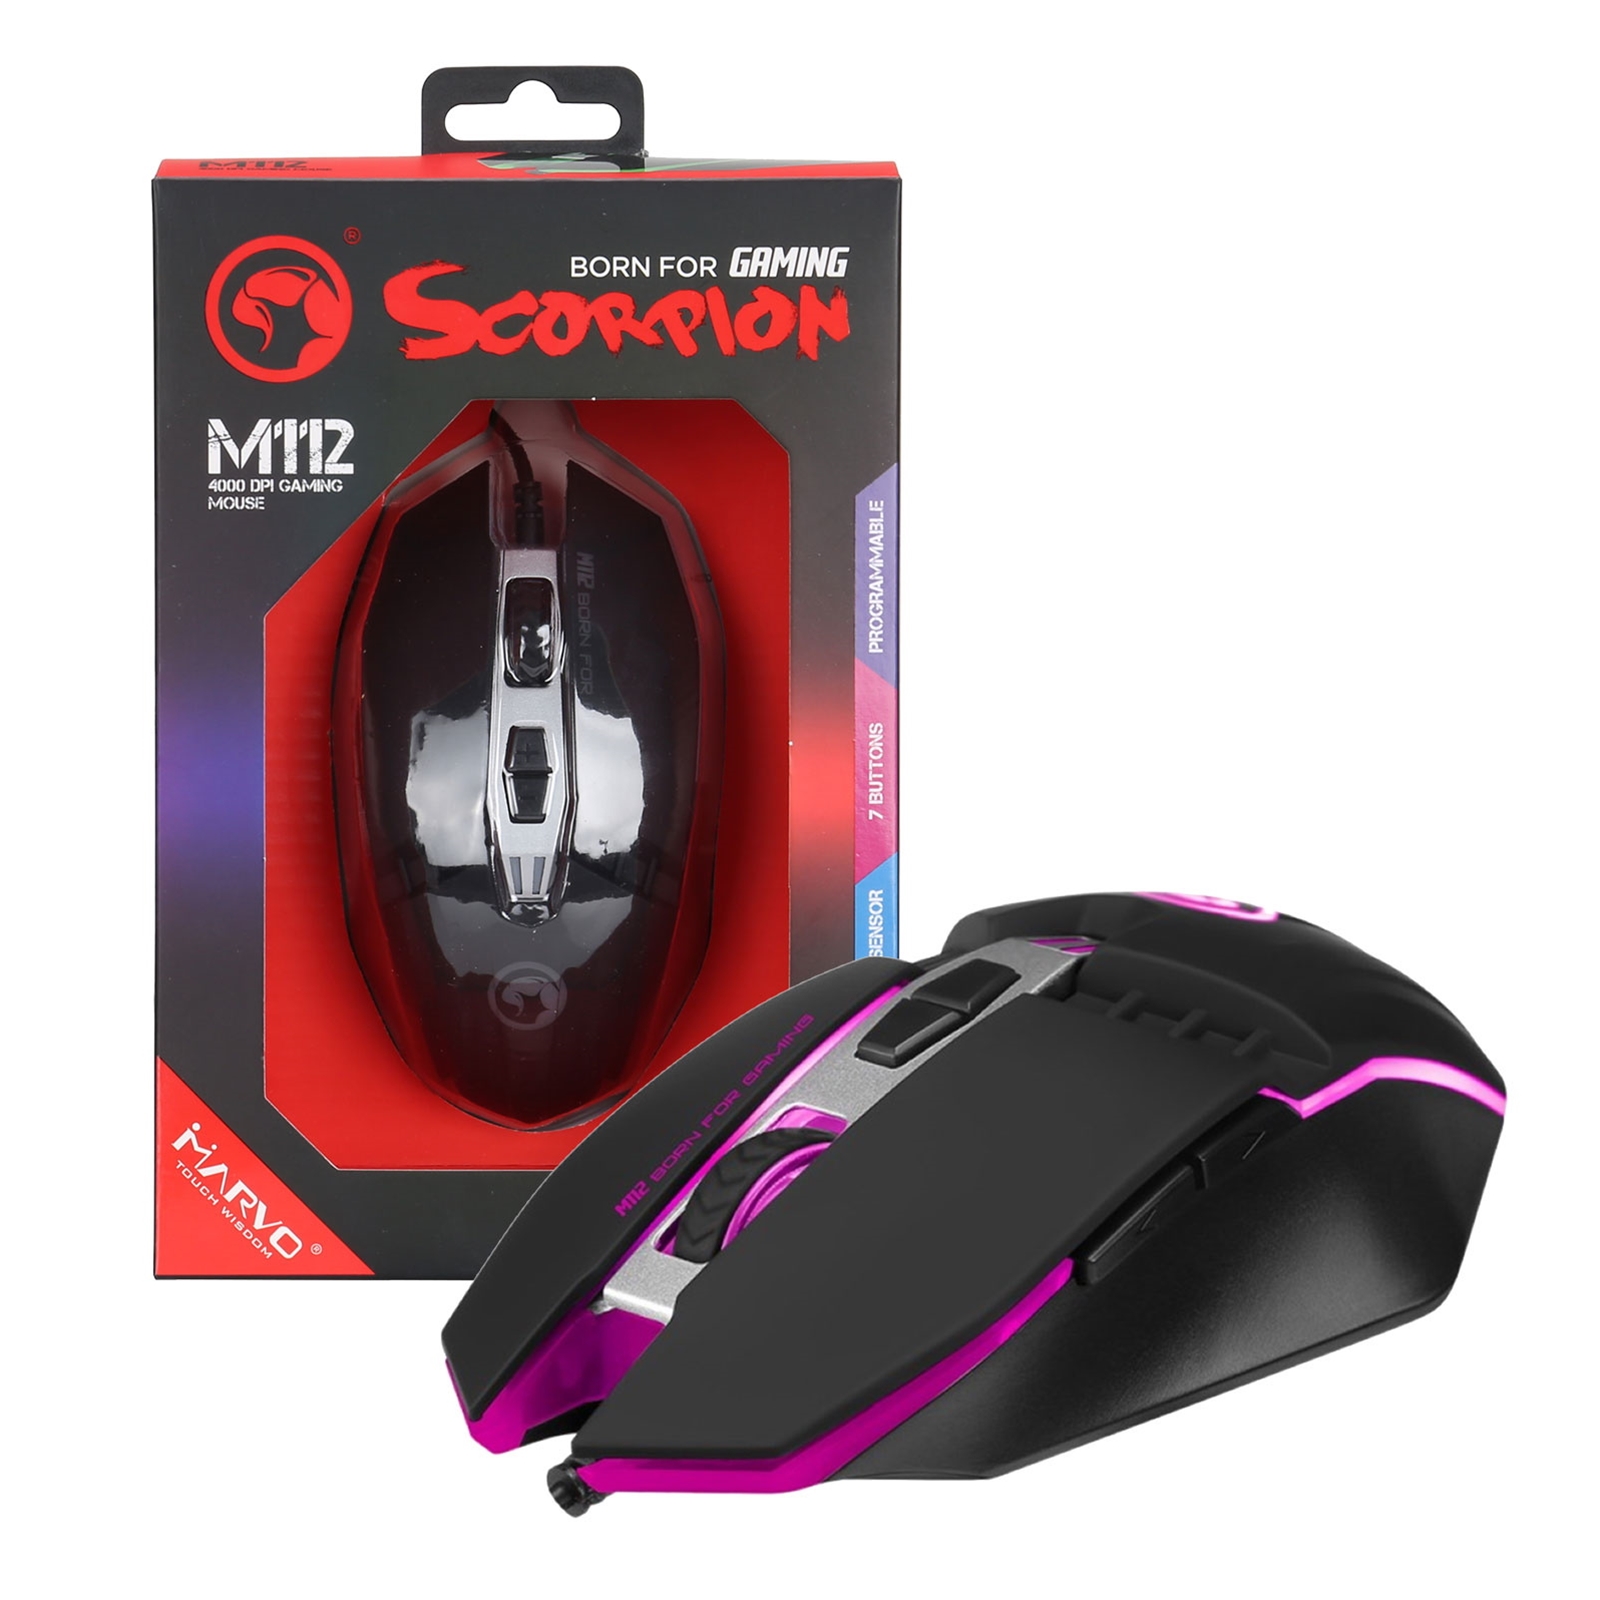 Marvo Scorpion M112 Gaming Mouse, USB 2.0, 7 Recurring LED Colours, Adjustable up to 4000 DPI, Gaming Grade Optical Sensor with 7 Programmable Buttons